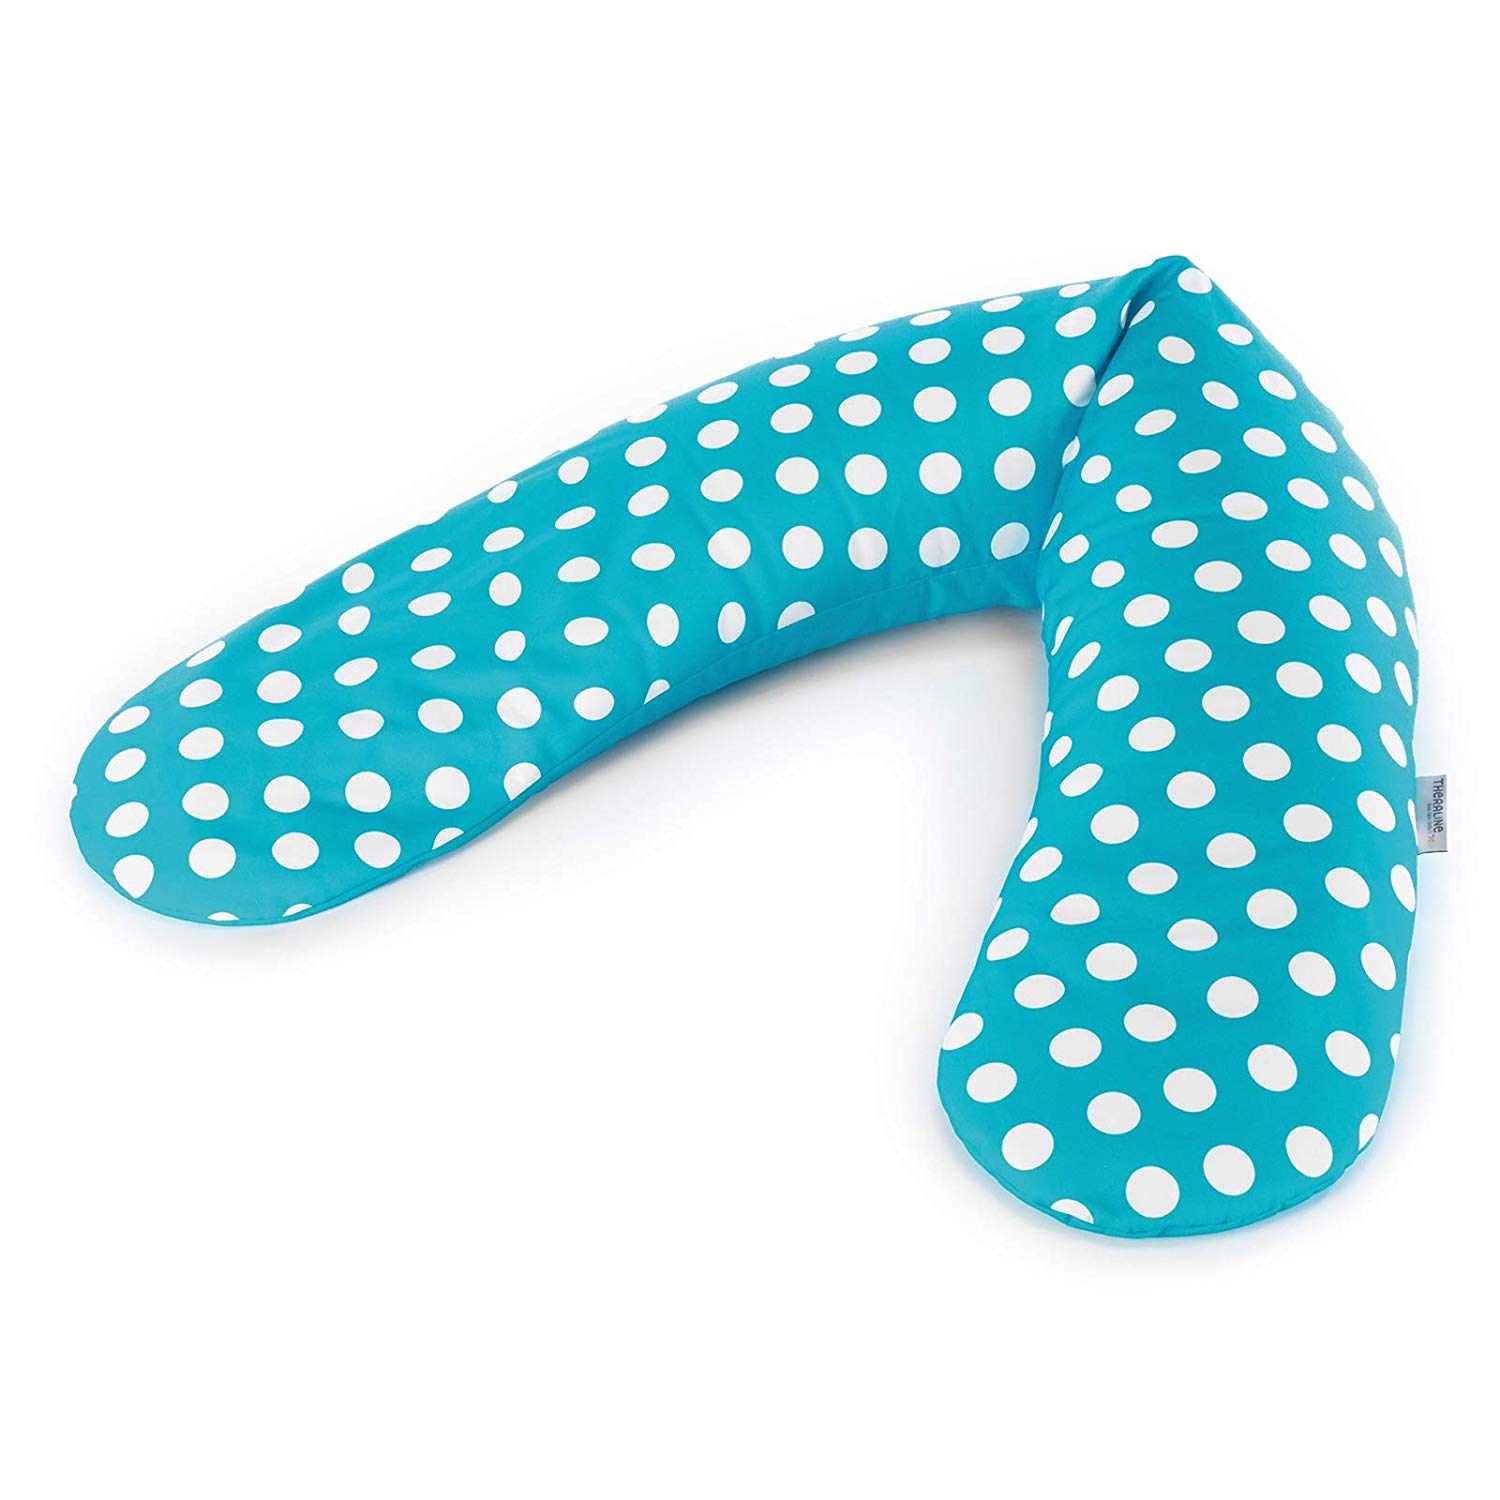 The Original Theraline Nursing Pillow 190 cm Micro Beads Filling Including Cover Indie Dots Petrol